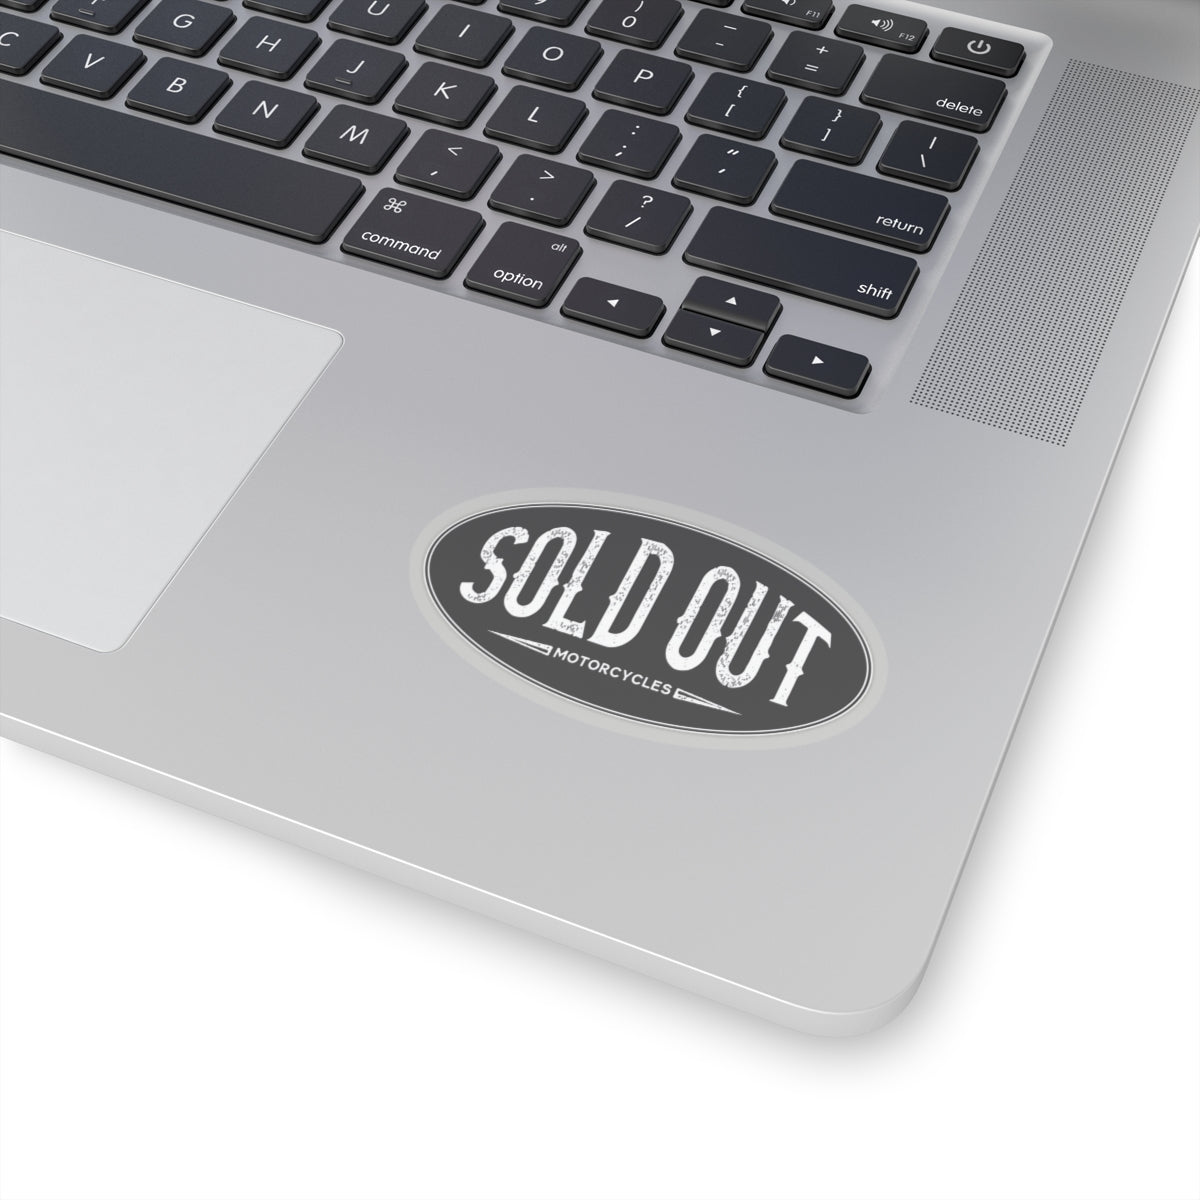 Sold Out Motorcycles Sticker